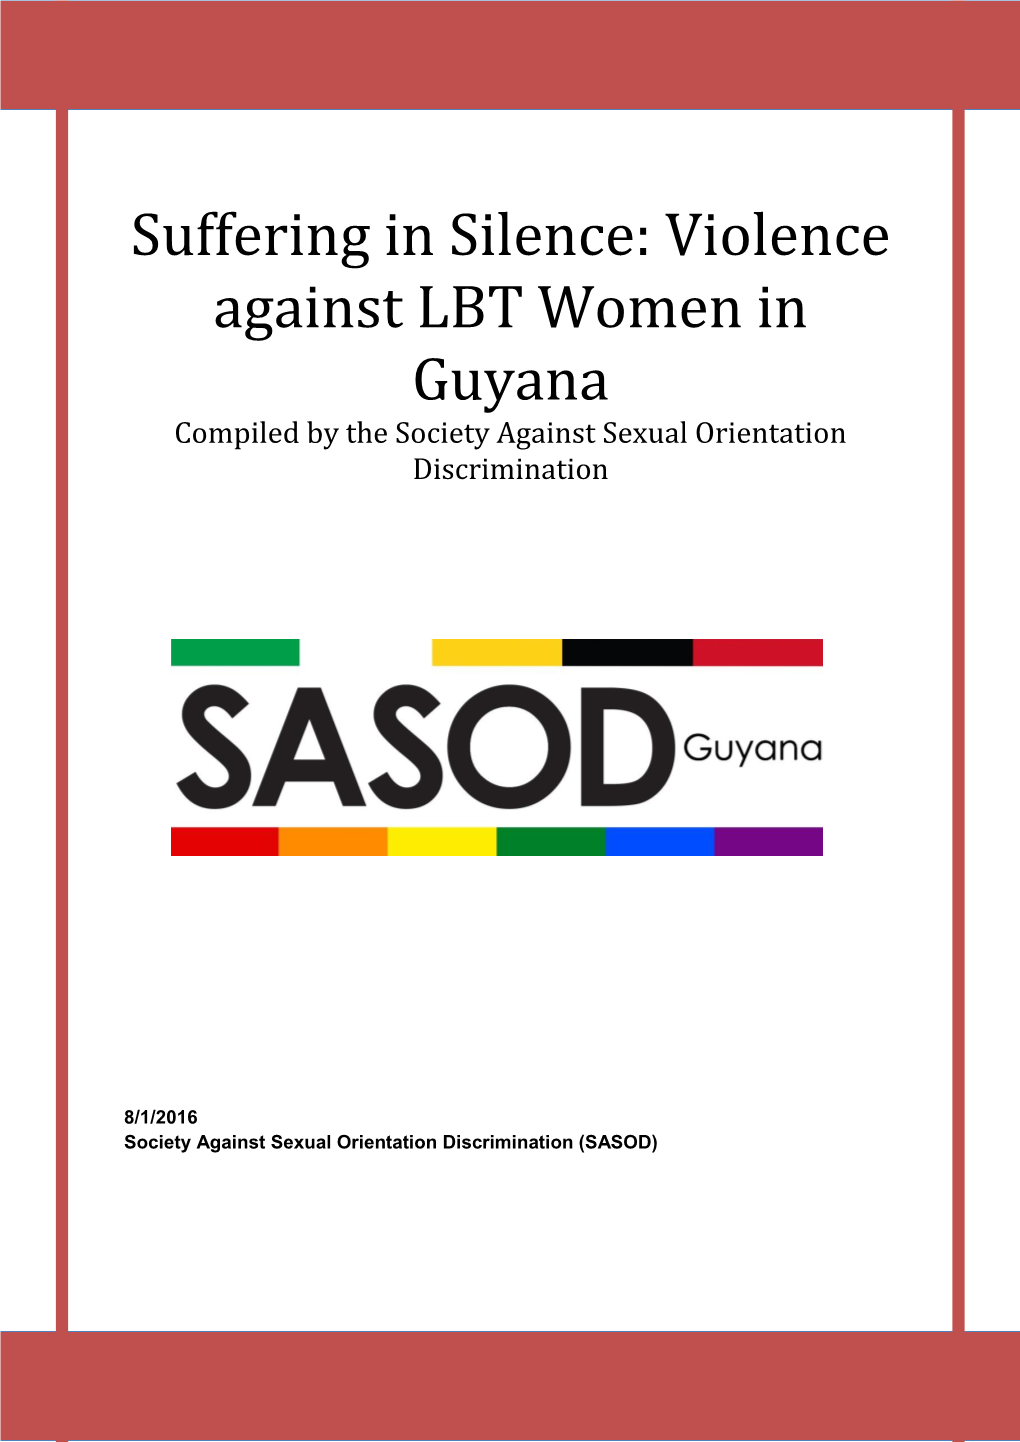 Violence Against LBT Women in Guyana Compiled by the Society Against Sexual Orientation Discrimination